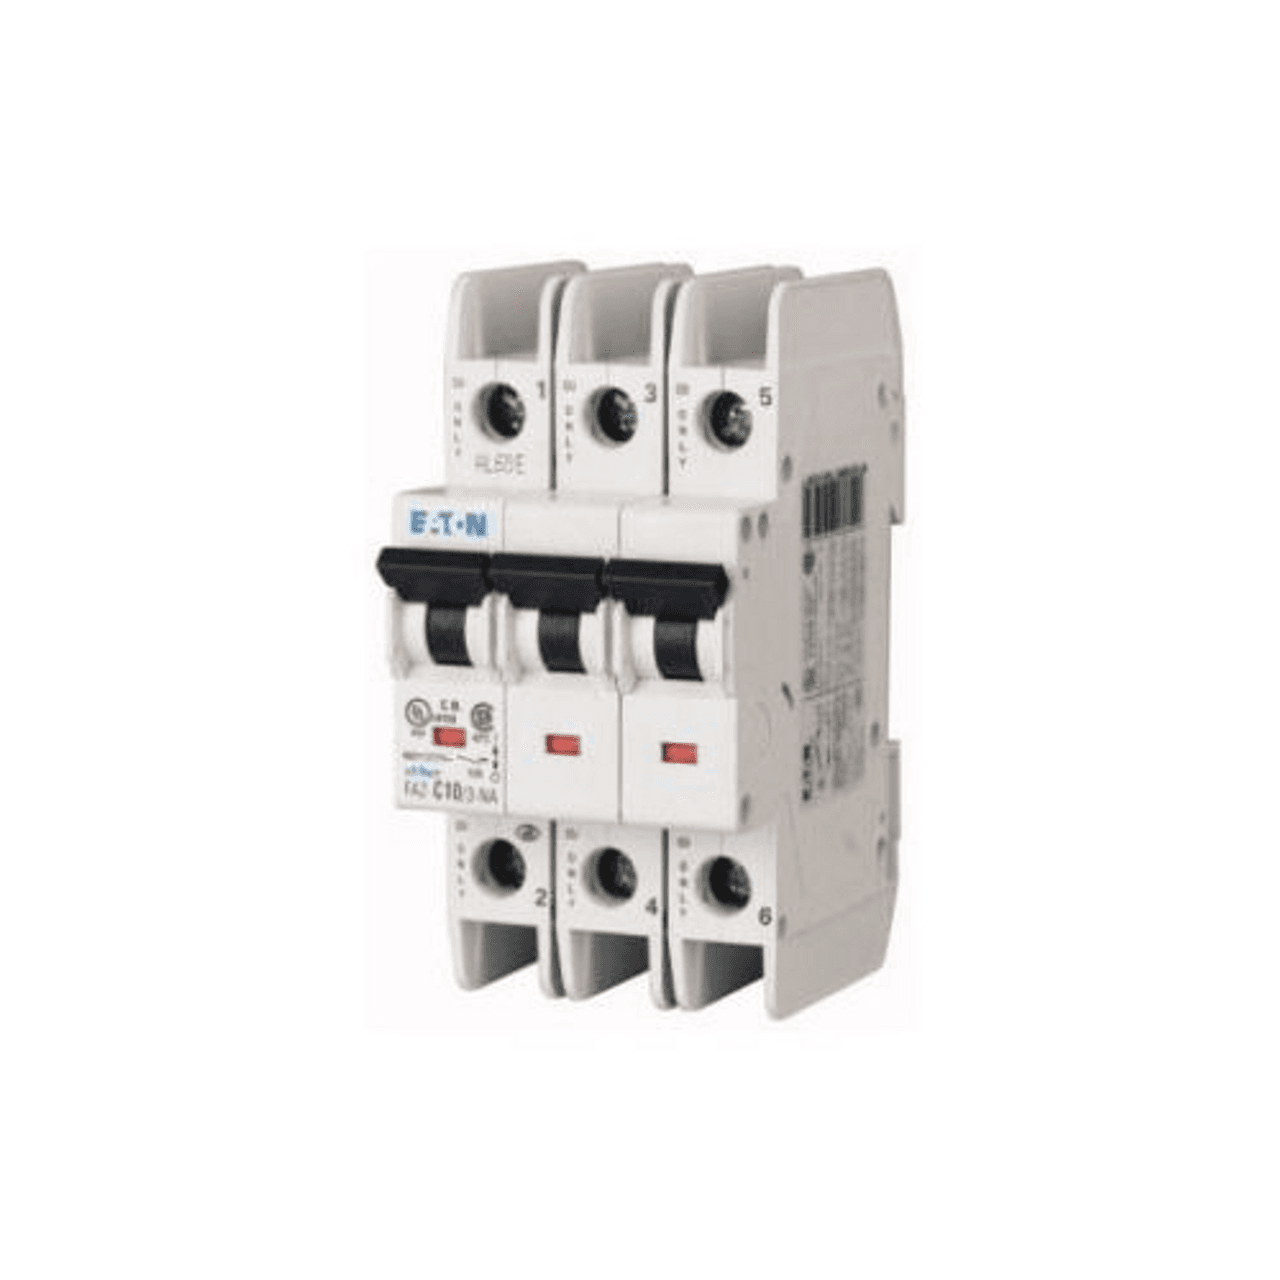 Eaton FAZ-B15/3-NA 277/480 VAC 50/60 Hz, 15 A, 3-Pole, 10/14 kA, 3 to 5 x Rated Current, Screw Terminal, DIN Rail Mount, Standard Packaging, B-Curve, Current Limiting, Thermal Magnetic, Miniature Circuit Breaker